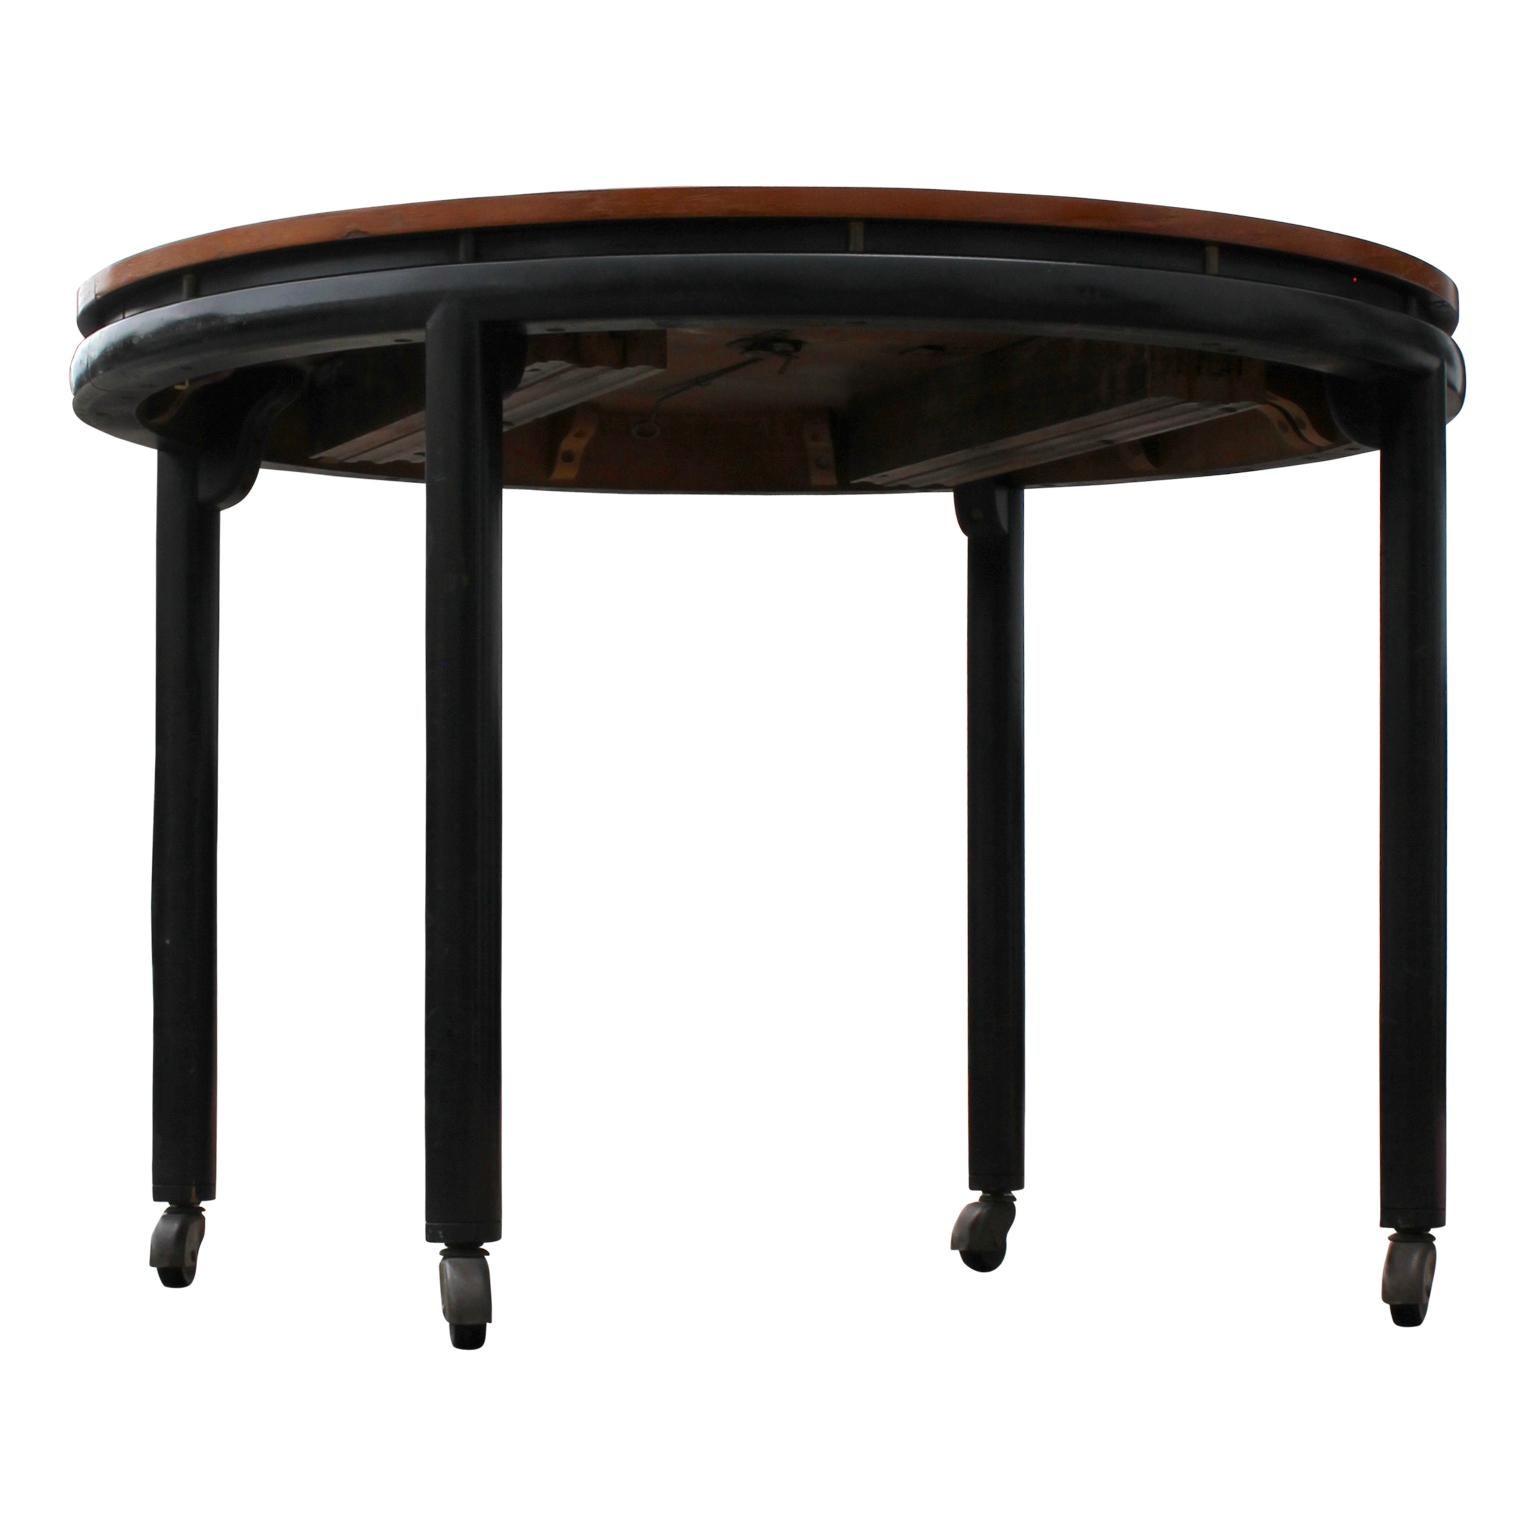 American Expandable Oval Table by Michael Taylor for Baker New World Collection